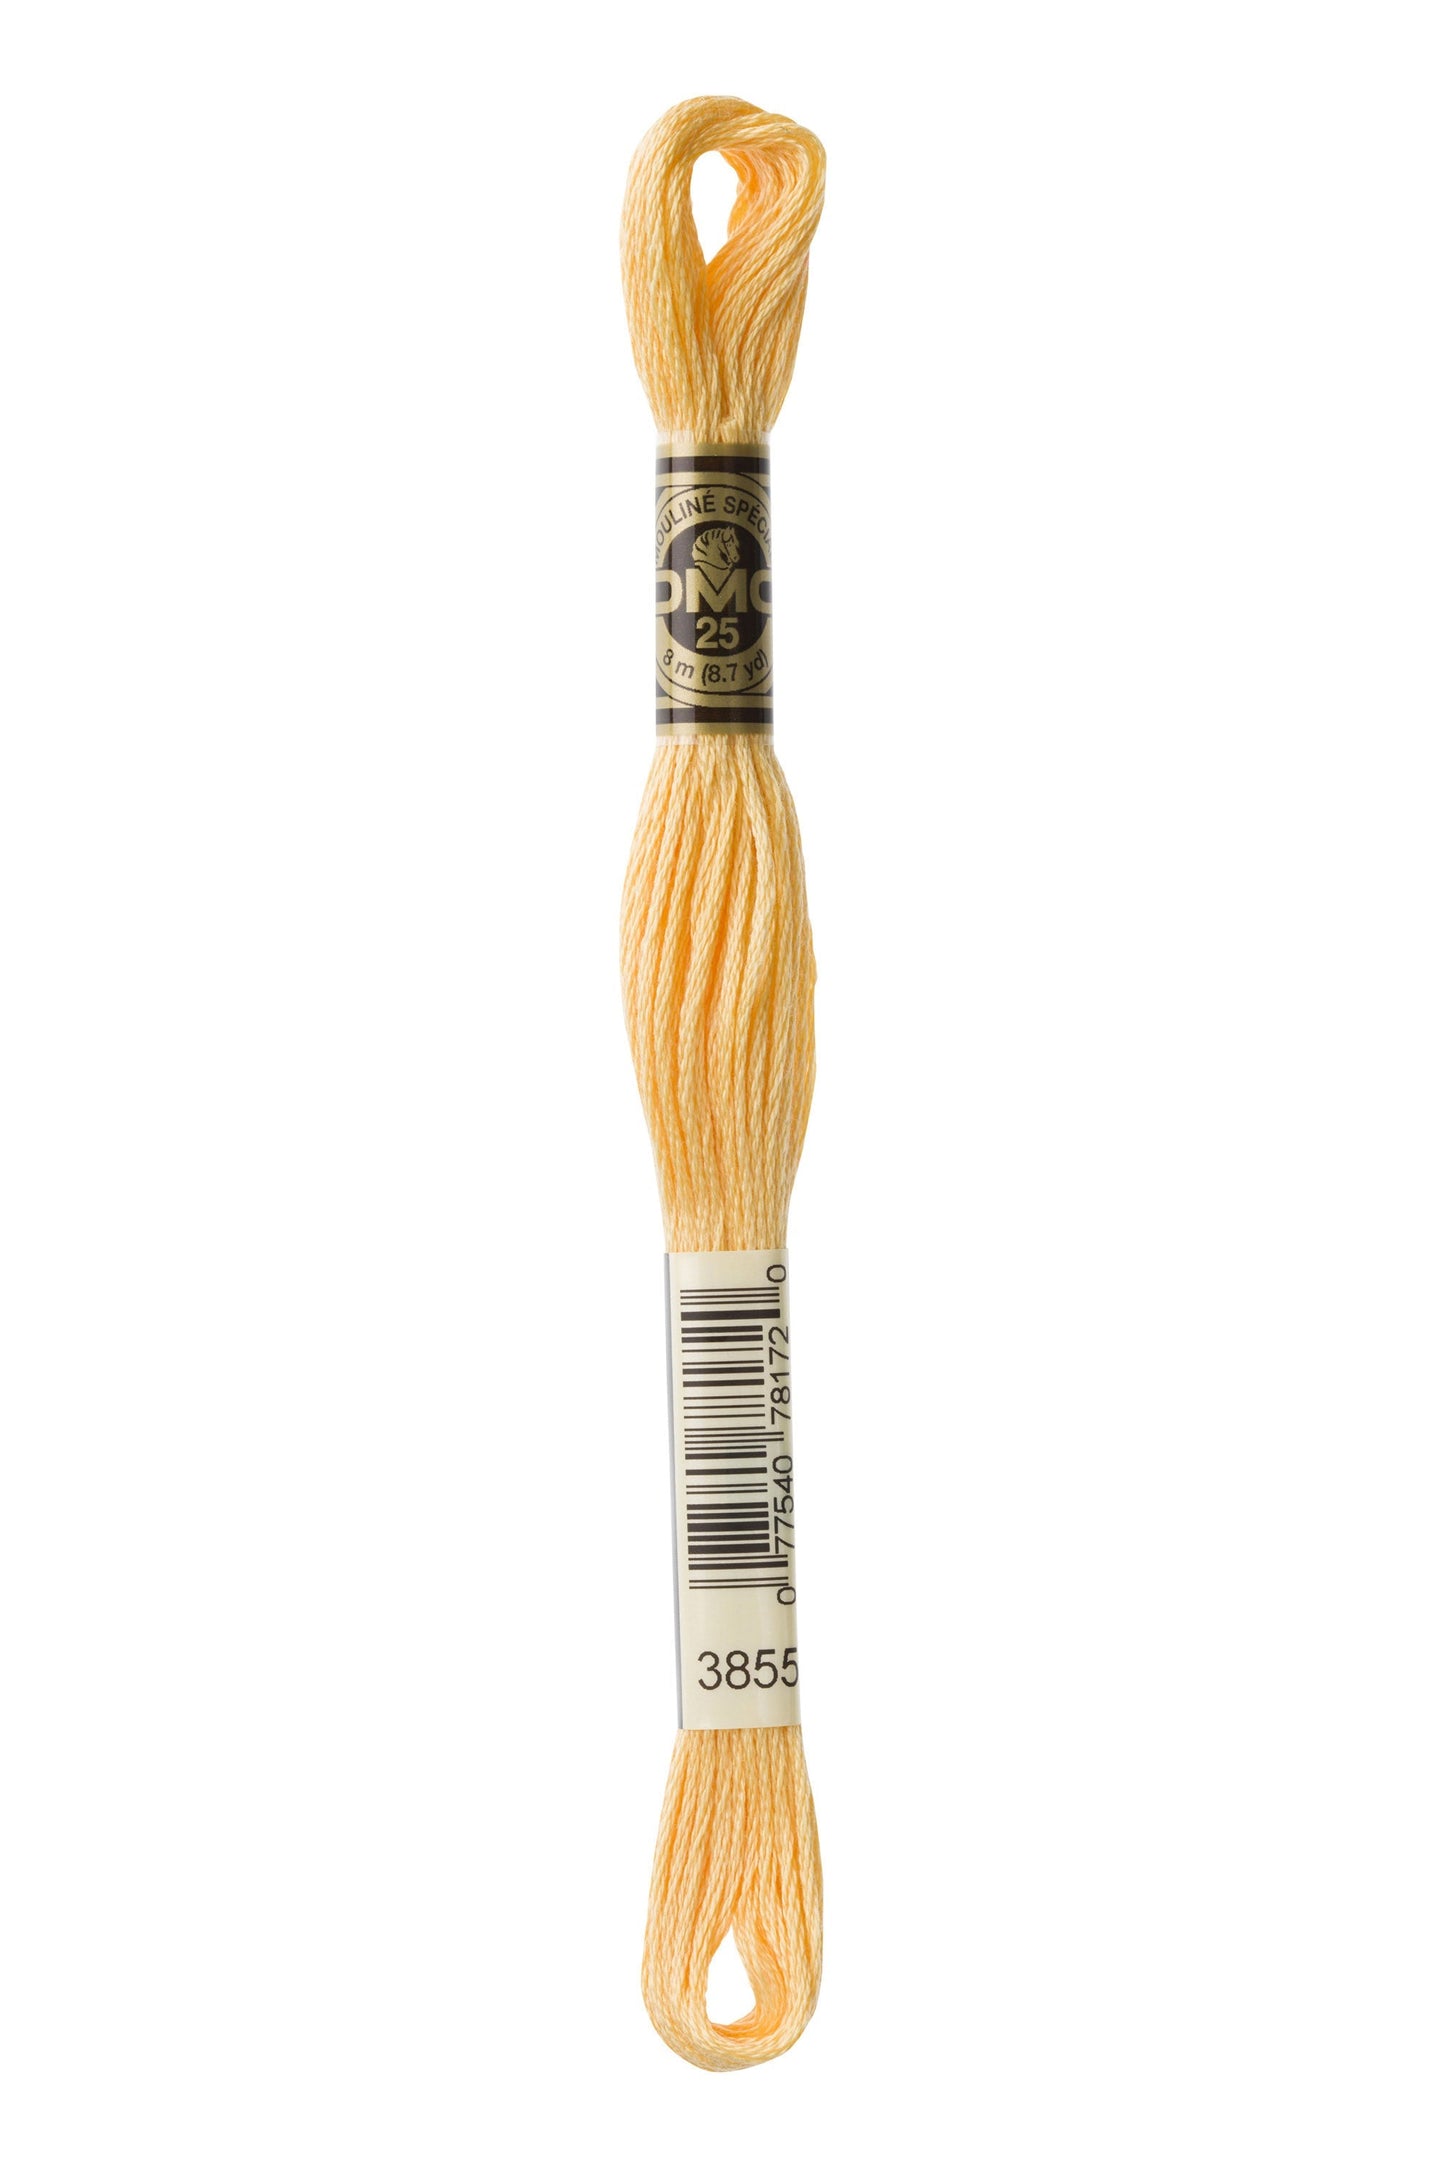 Six-Strand Embroidery Floss - 3855 (Desert Winds)-Embroidery Thread-Wild and Woolly Yarns